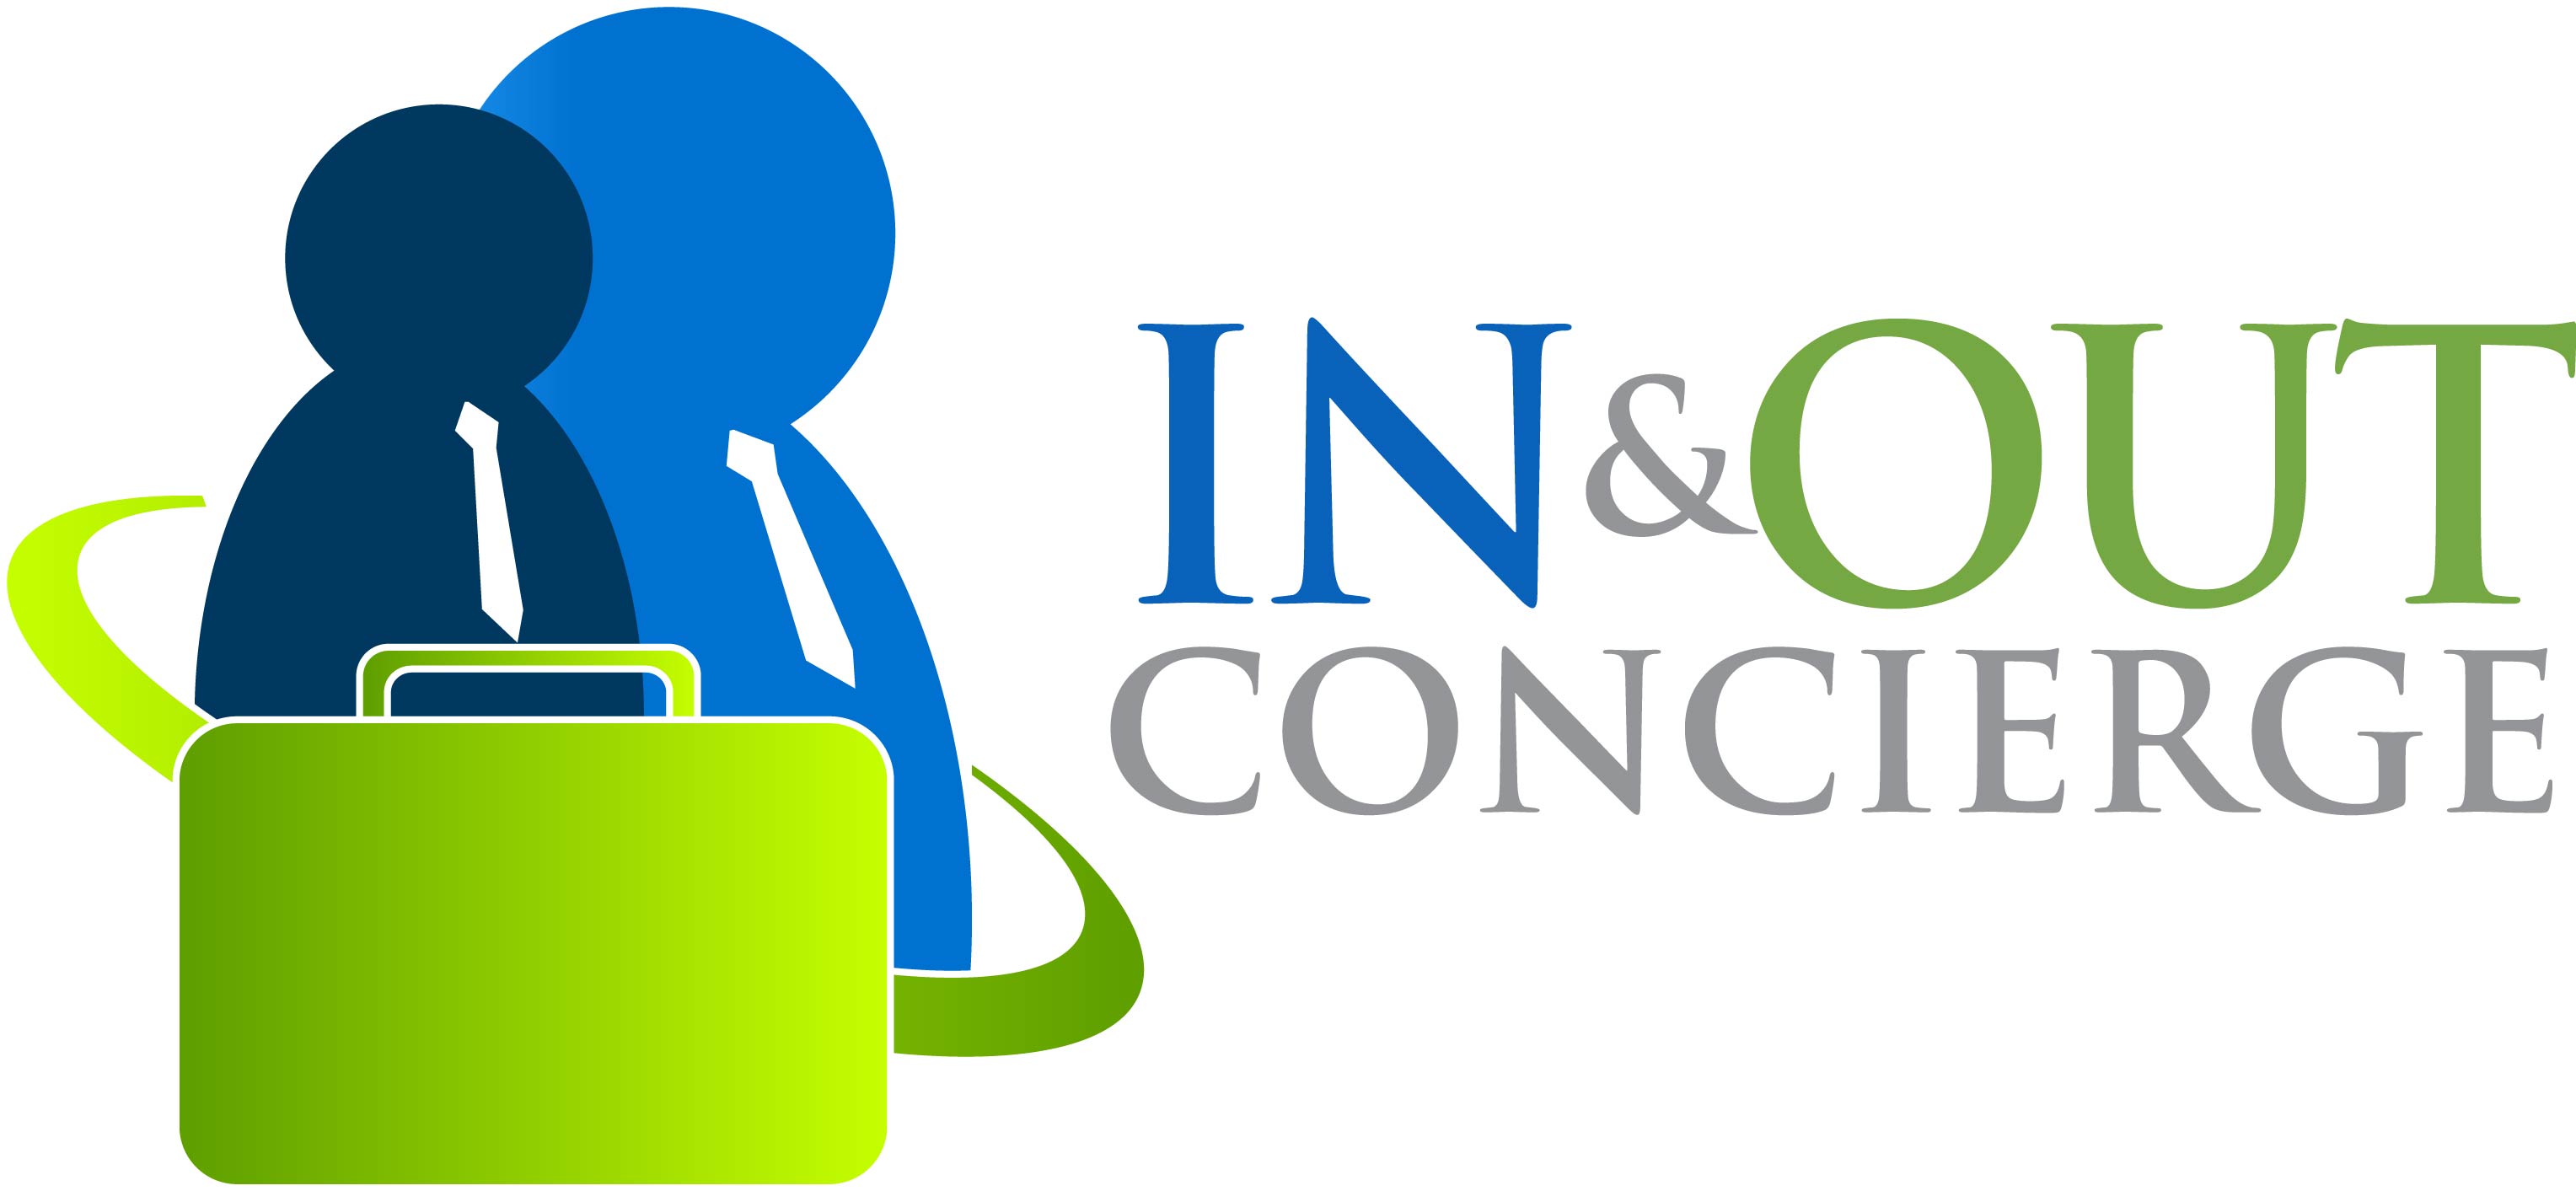 IN AND OUT CONCIERGE